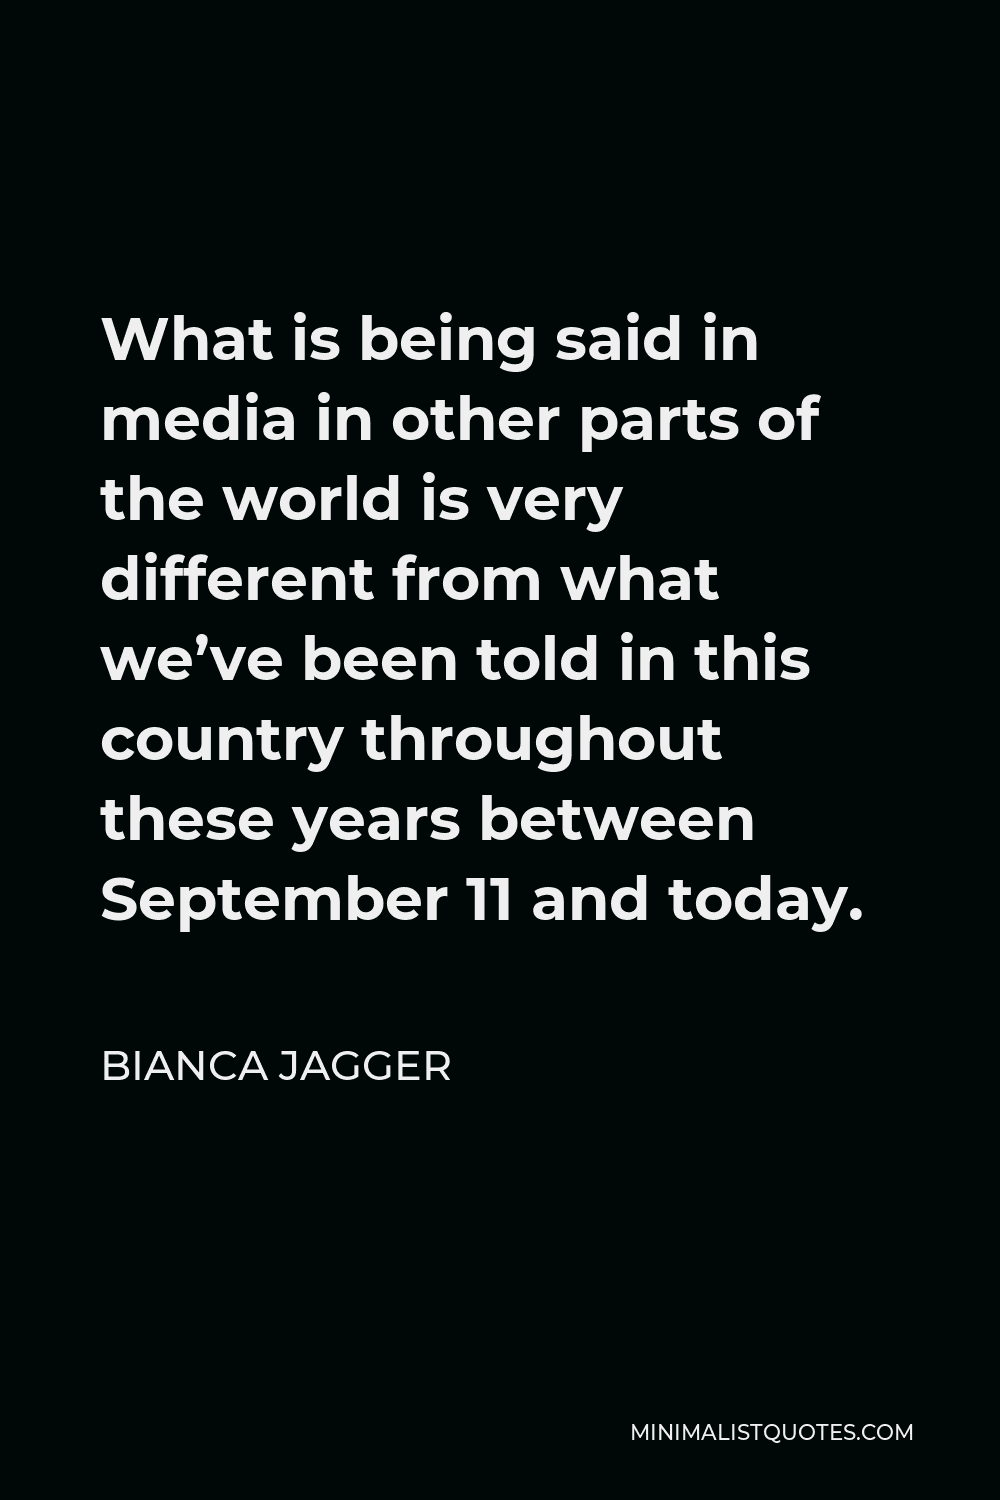 Bianca Jagger Quote - What is being said in media in other parts of the world is very different from what we’ve been told in this country throughout these years between September 11 and today.